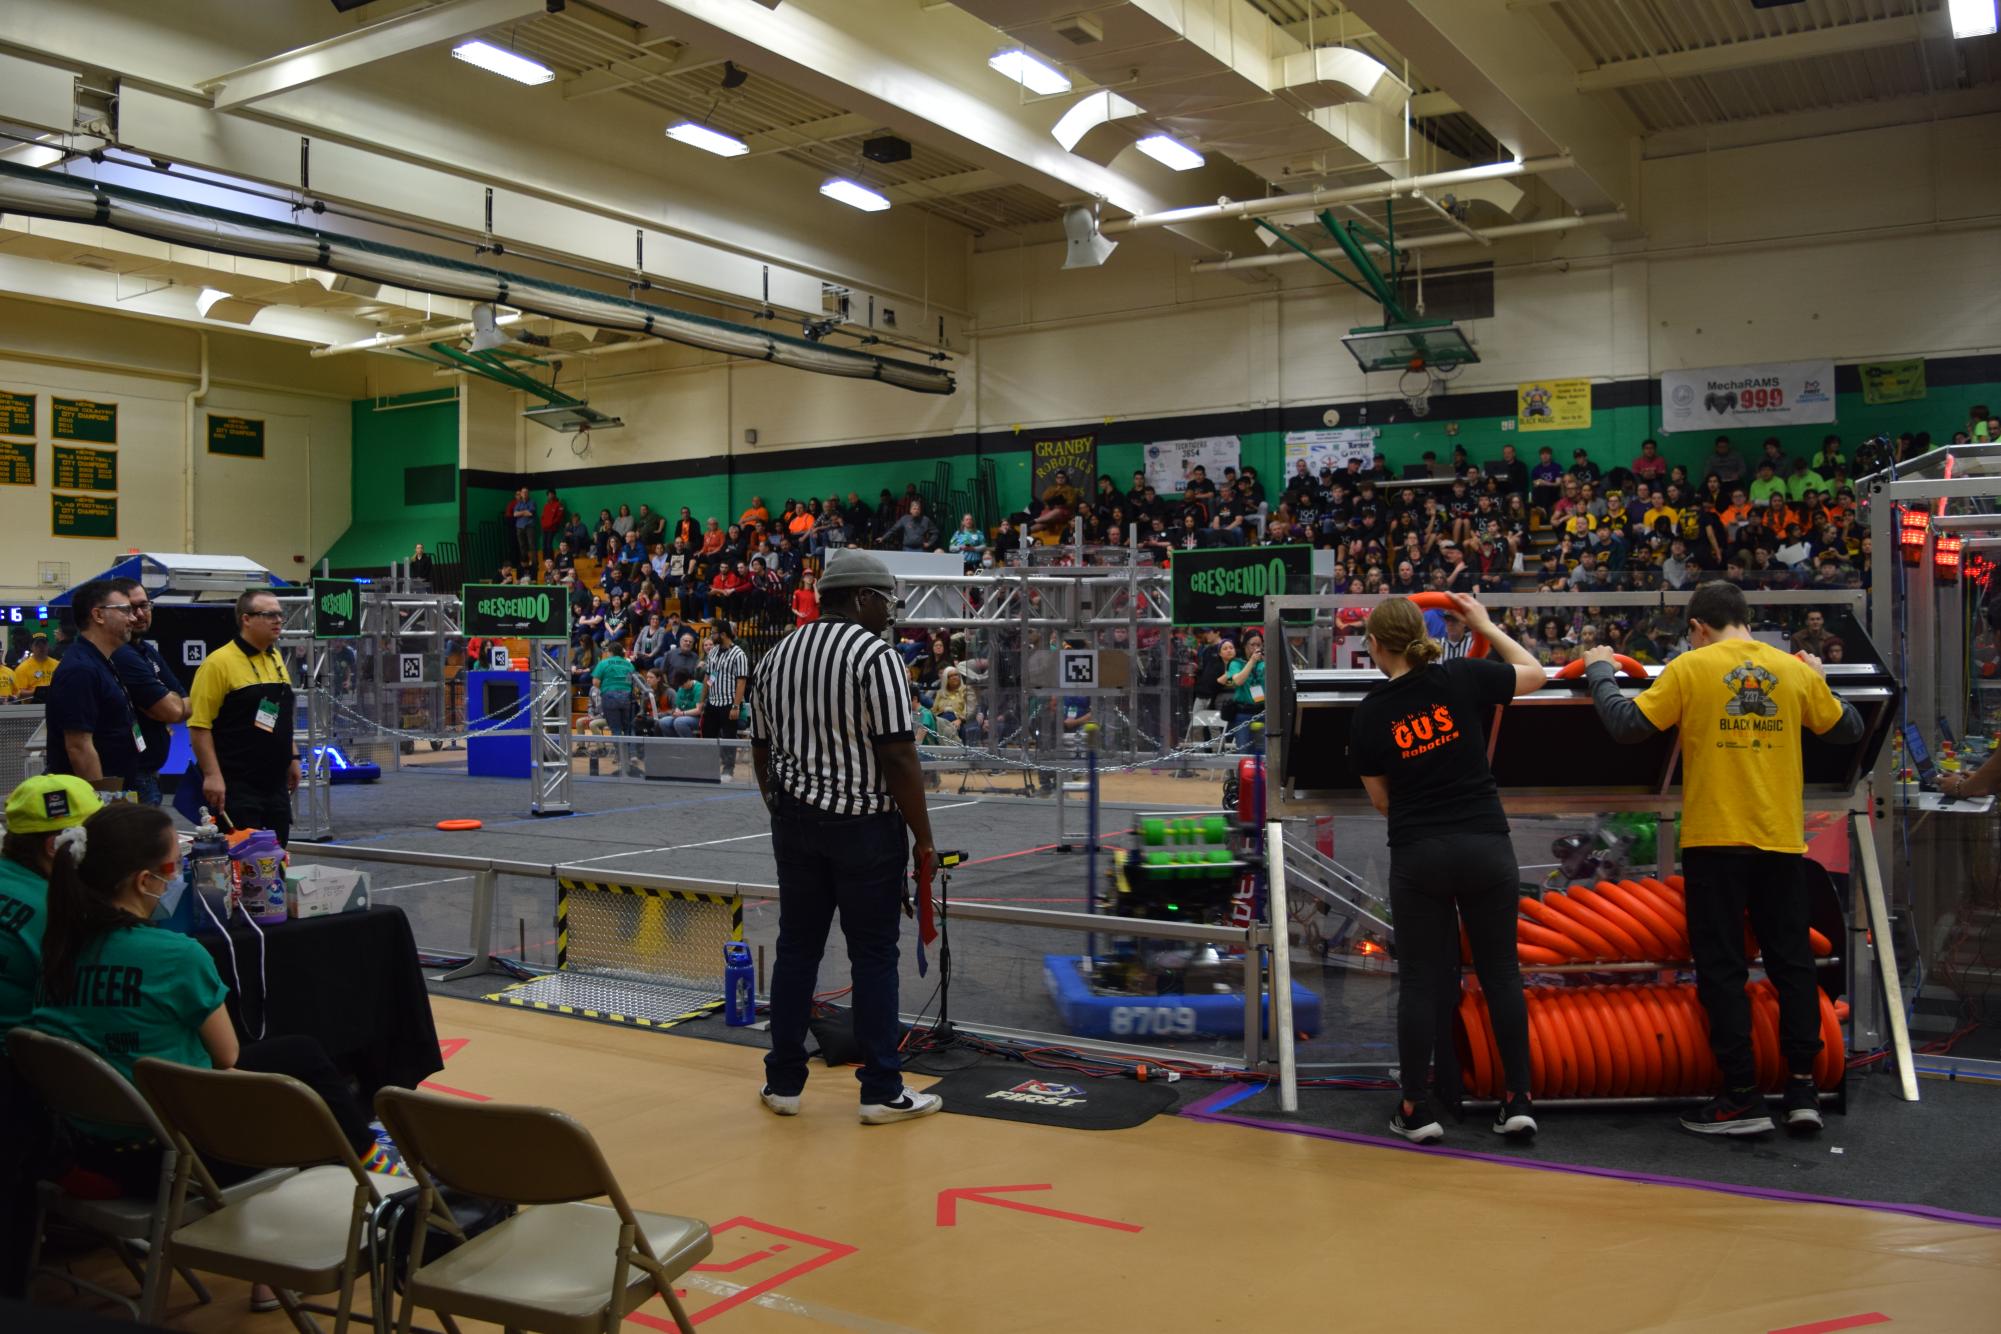 The+Robotics+Teams+First+Competition+of+the+Season